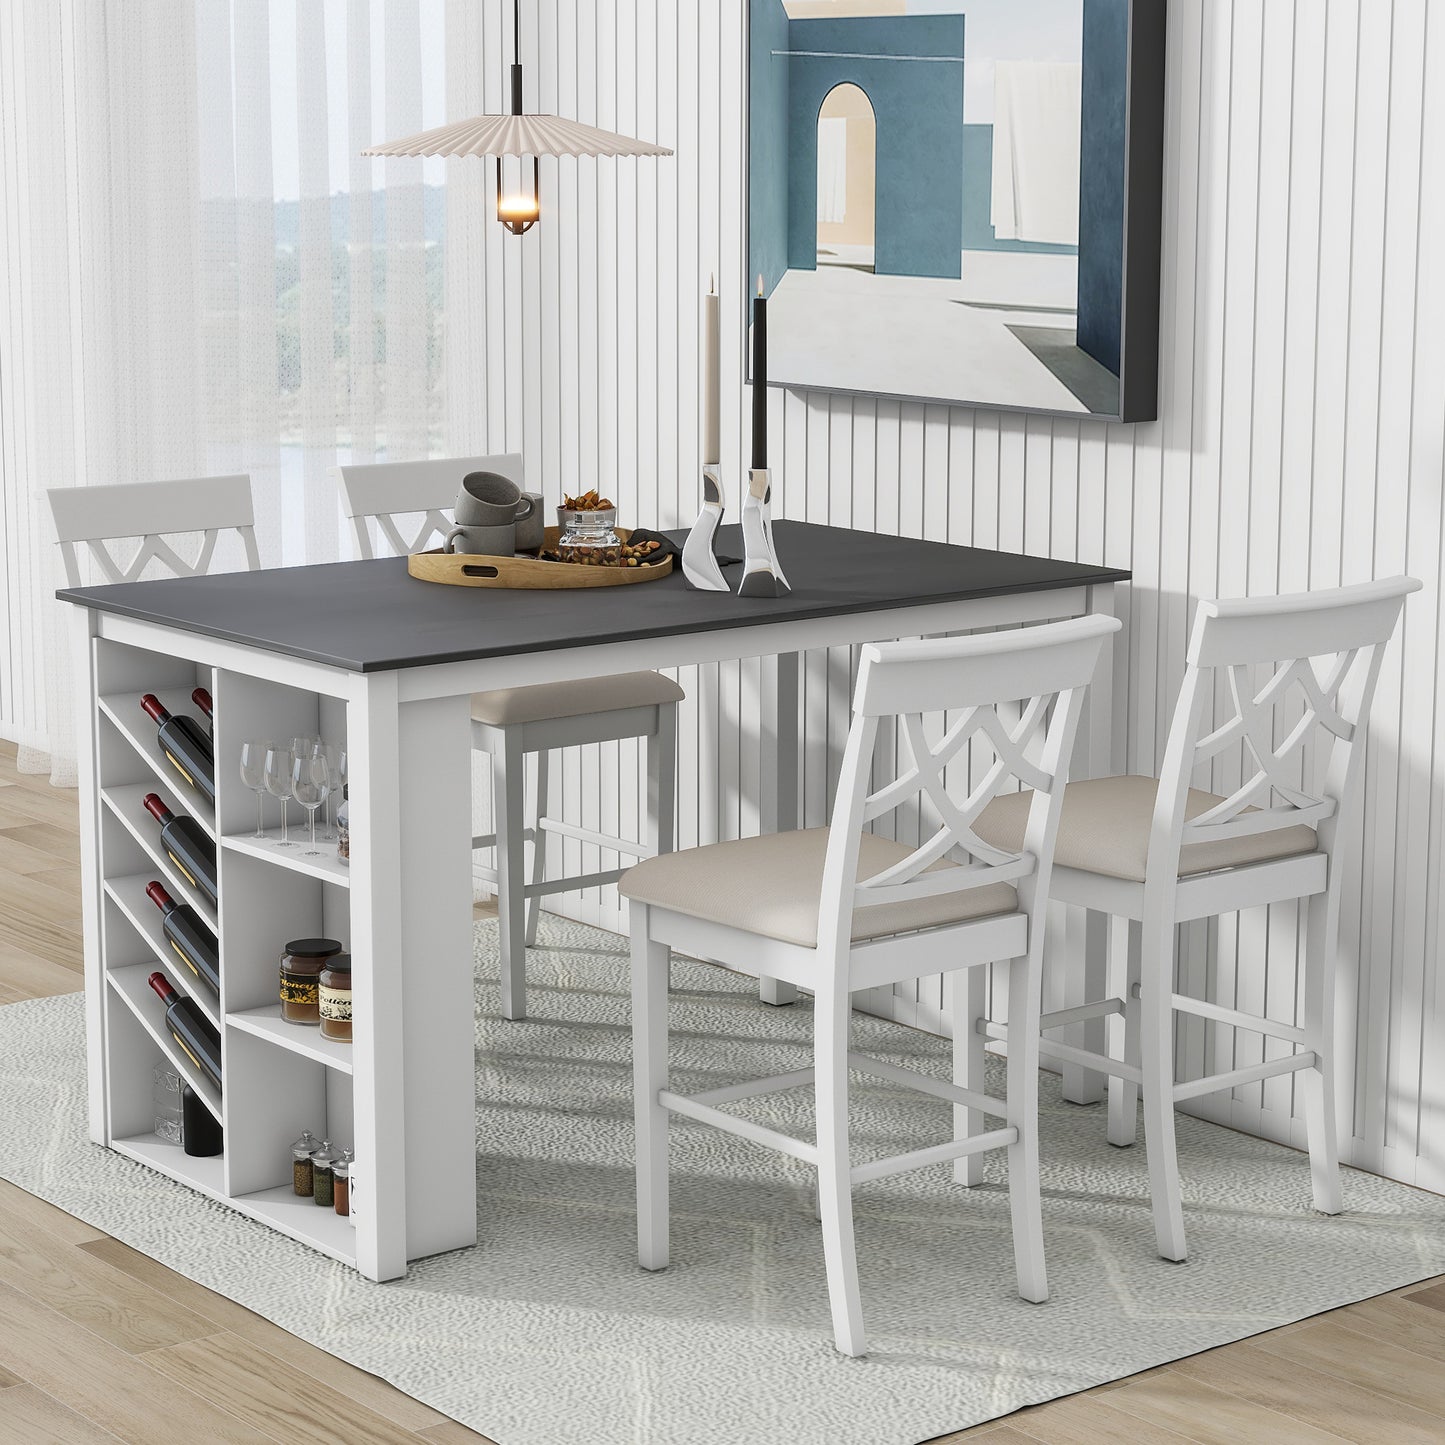 TOPMAX Counter Height 5-piece Solid Wood Dining Table Set, 59*35.4Inch Table with Wine Rack and 4 Upholstered Chairs, White